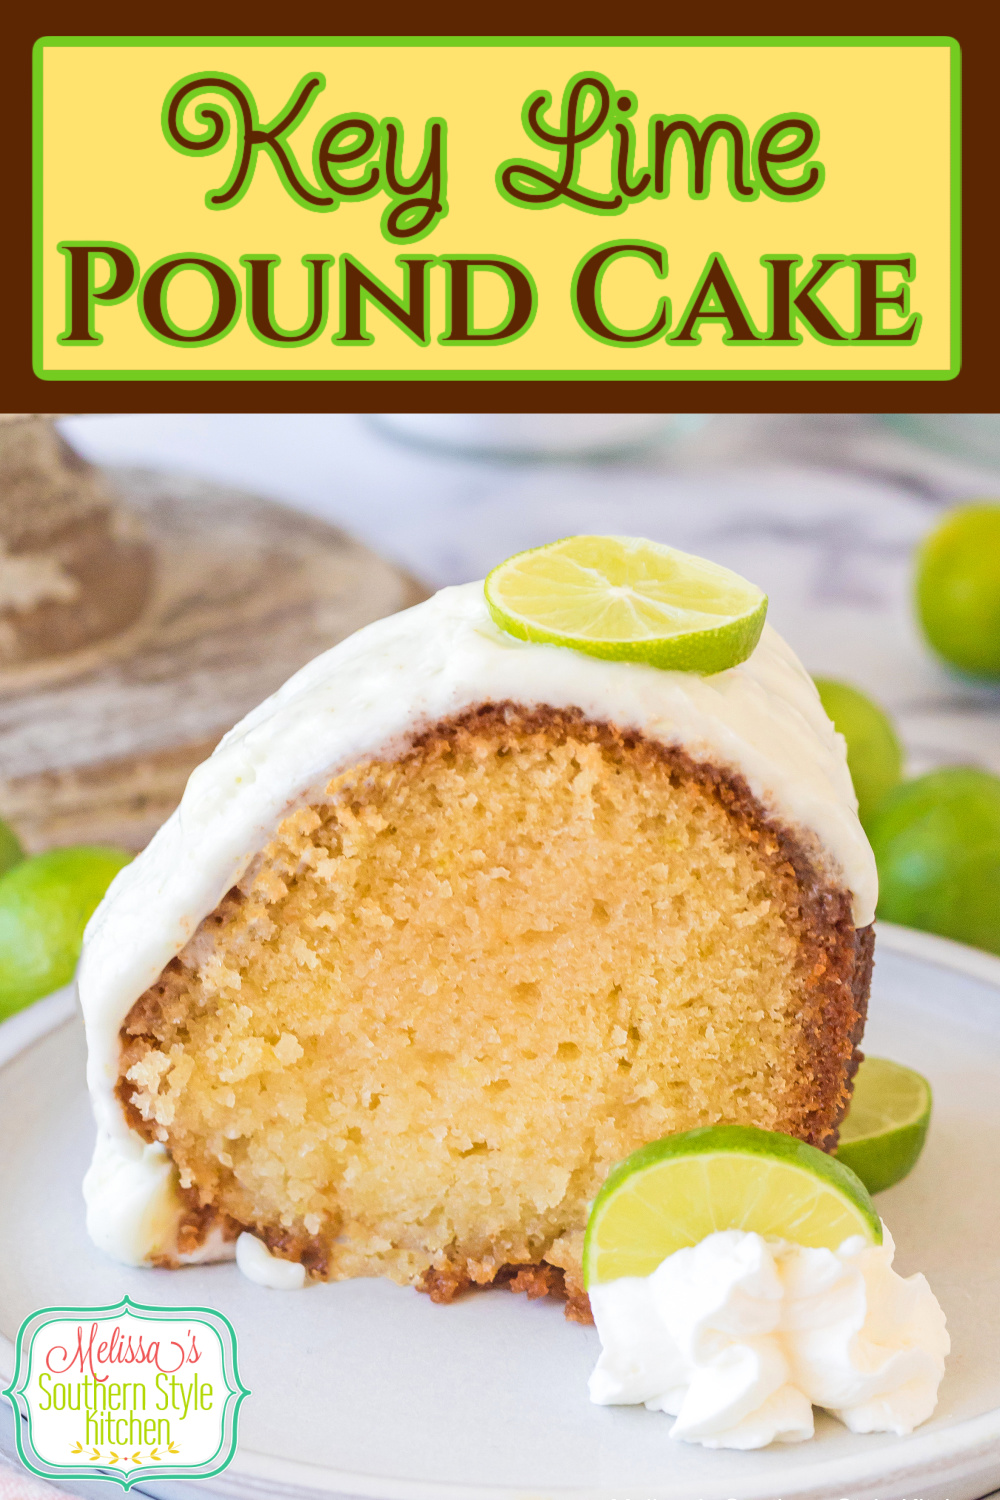 This Key Lime Pound Cake recipe features a bright fresh flavor that makes it a tasty option for warm weather desserts and holidays year-round. #keylimecake #poundcakerecipes #southernpoundcake #keylimedesserts #keylimes #bestkeylimecake #dessertrecipes #summerdesserts